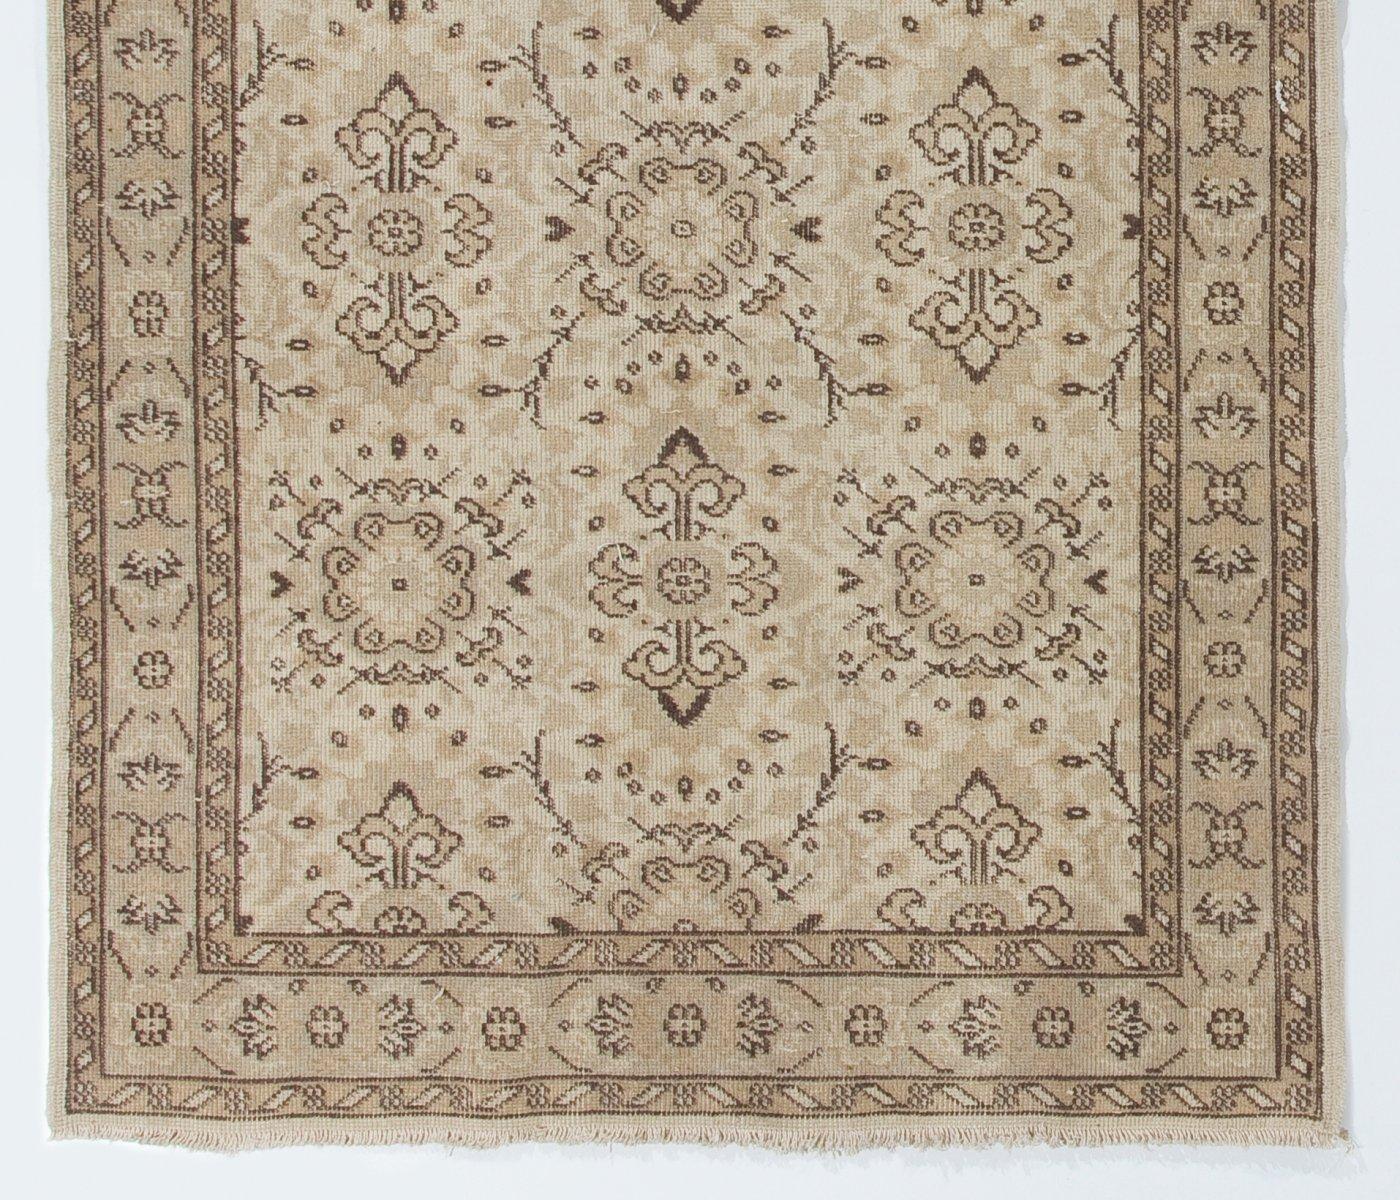 Oushak 4x7 ft Vintage Floral Design Handmade Central Anatolian Rug in Neutral Colors For Sale